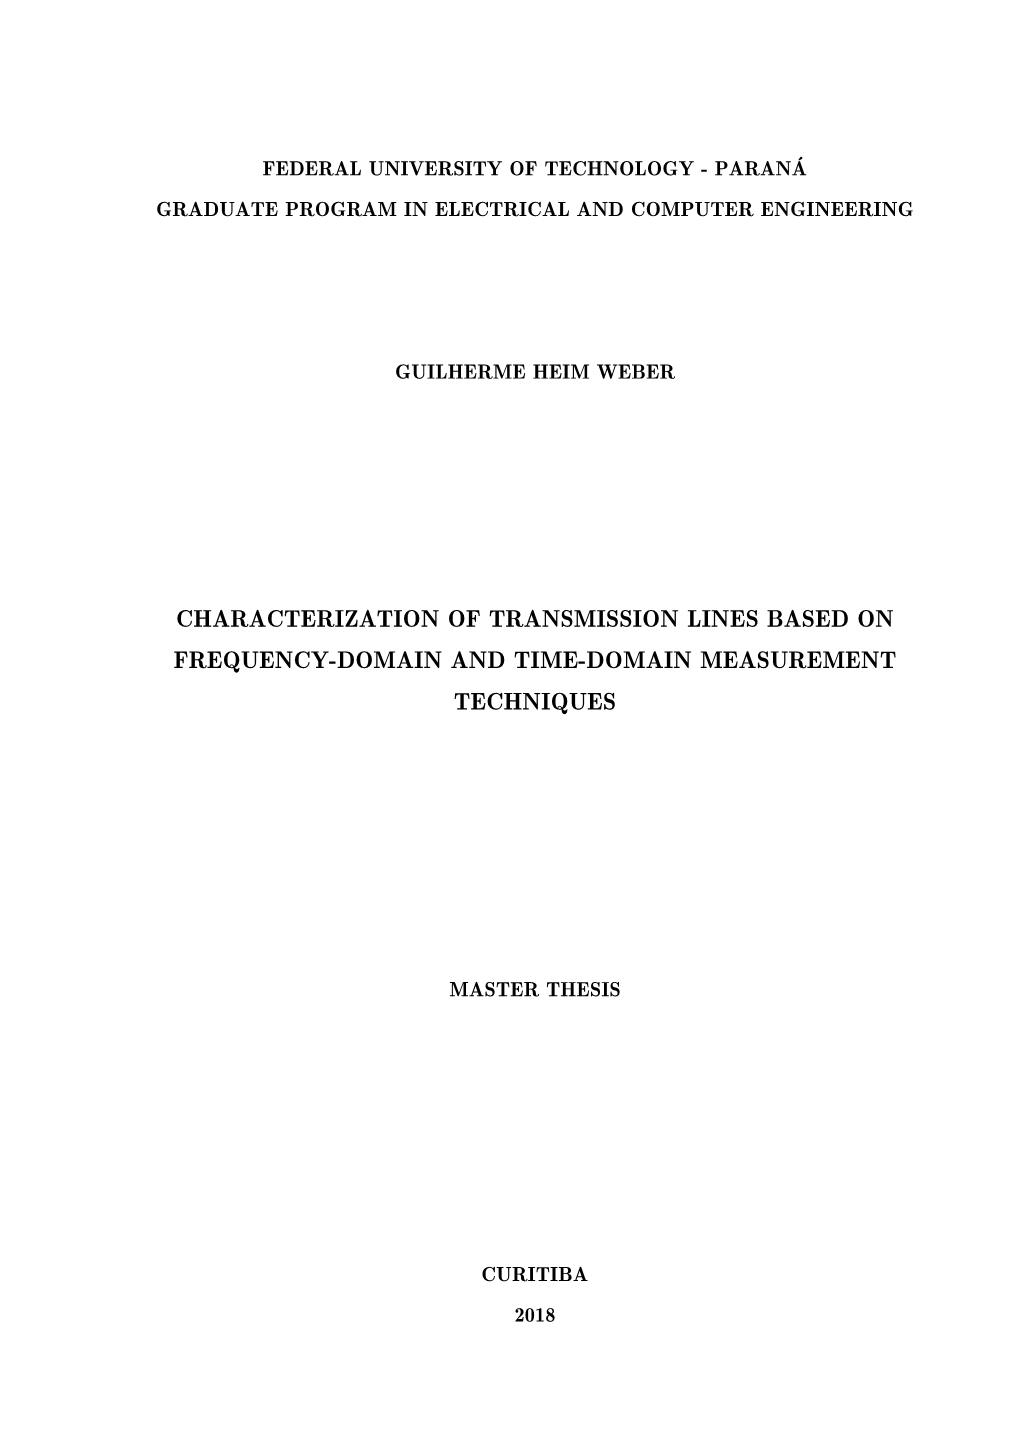 Characterization of Transmission Lines Based on Frequency-Domain and Time-Domain Measurement Techniques